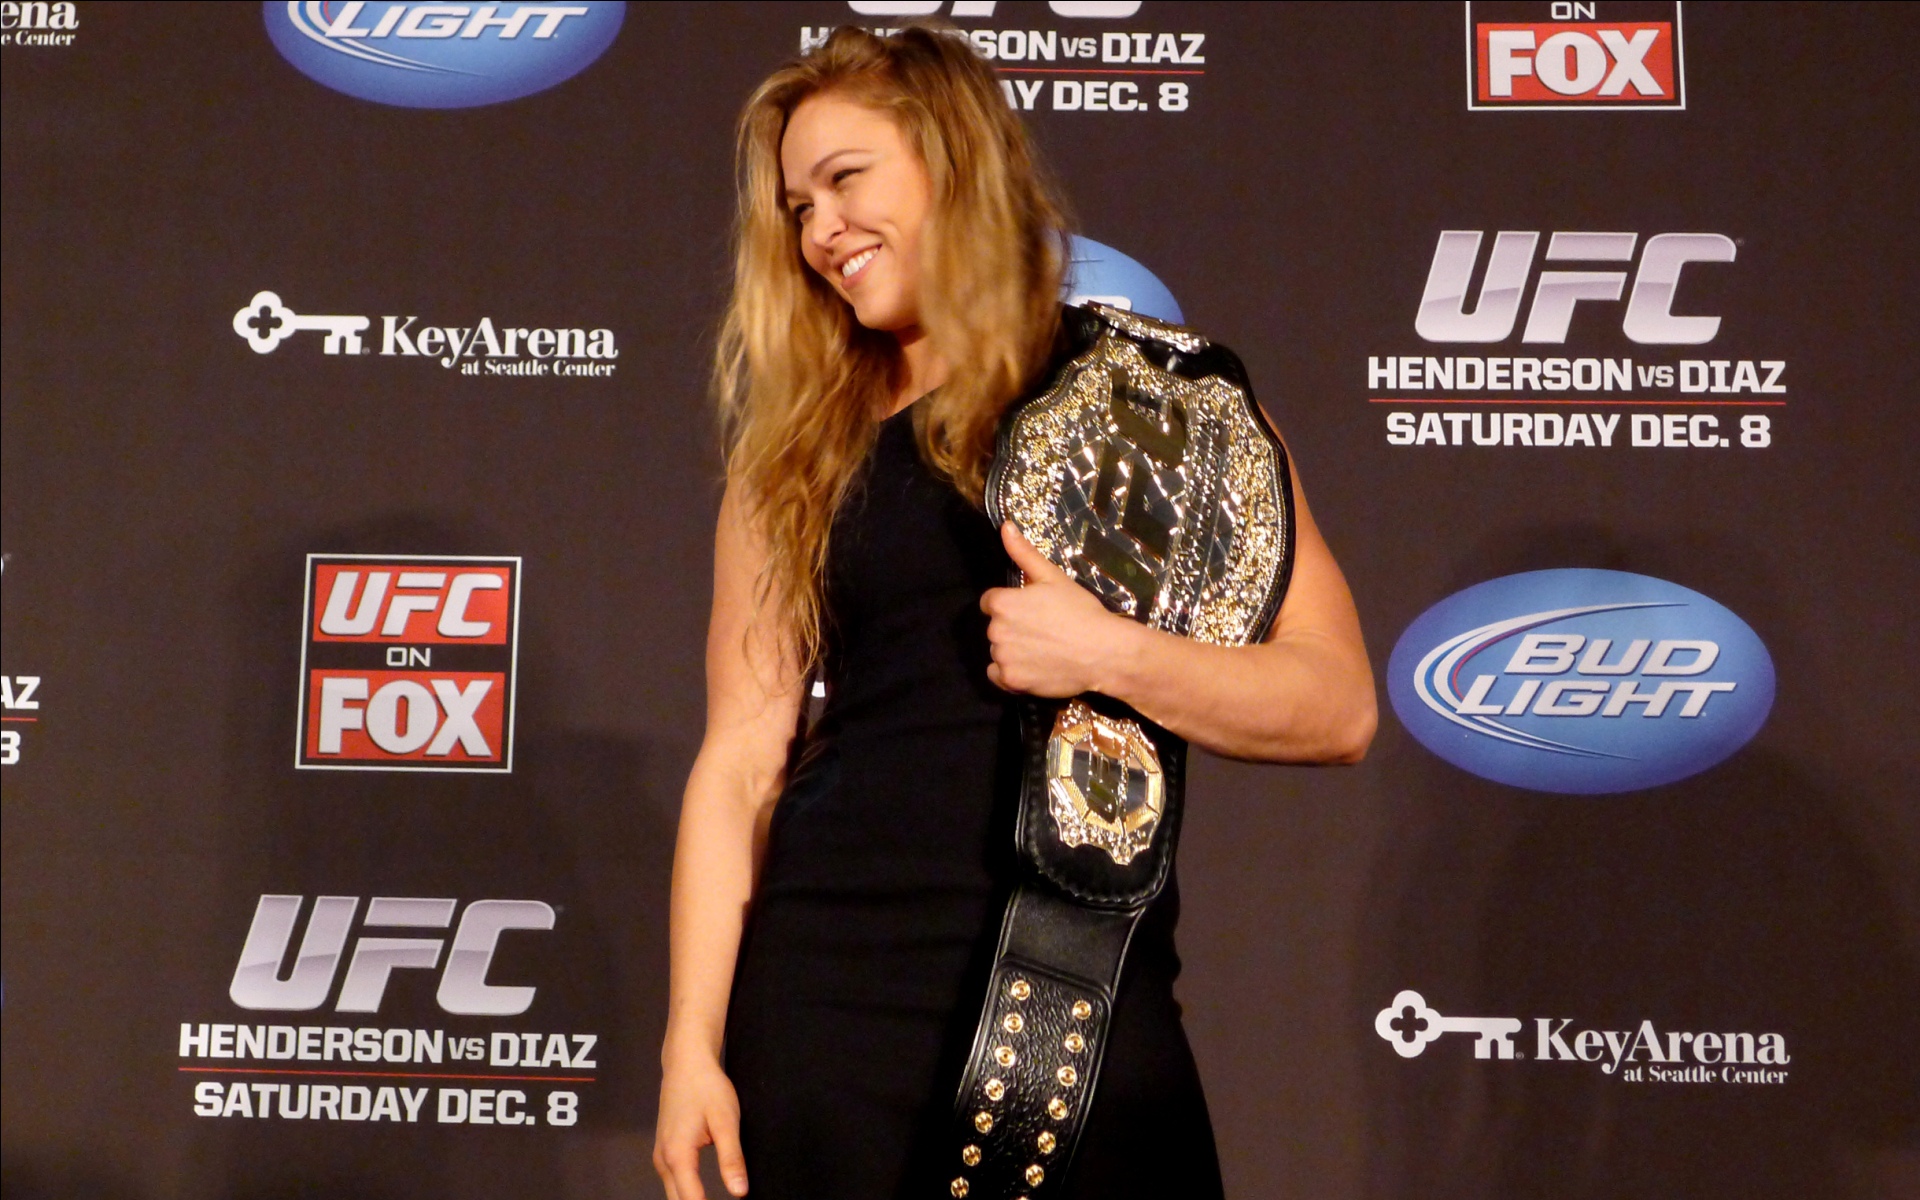 With Ronda Rousey HD Wallpaper